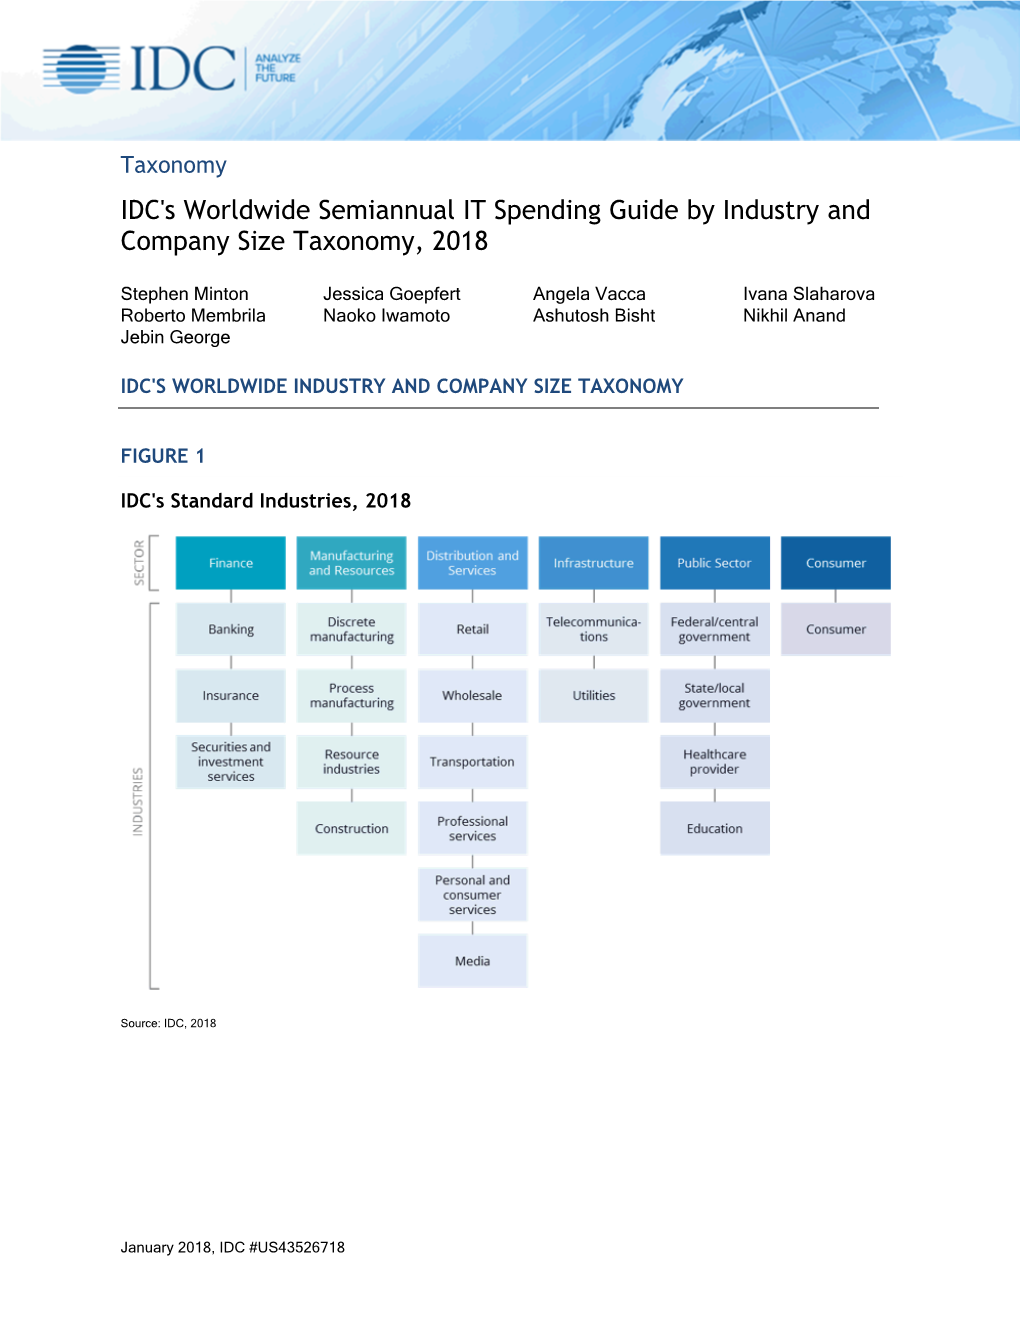 IDC's Worldwide Semiannual IT Spending Guide by Industry and Company Size Taxonomy, 2018